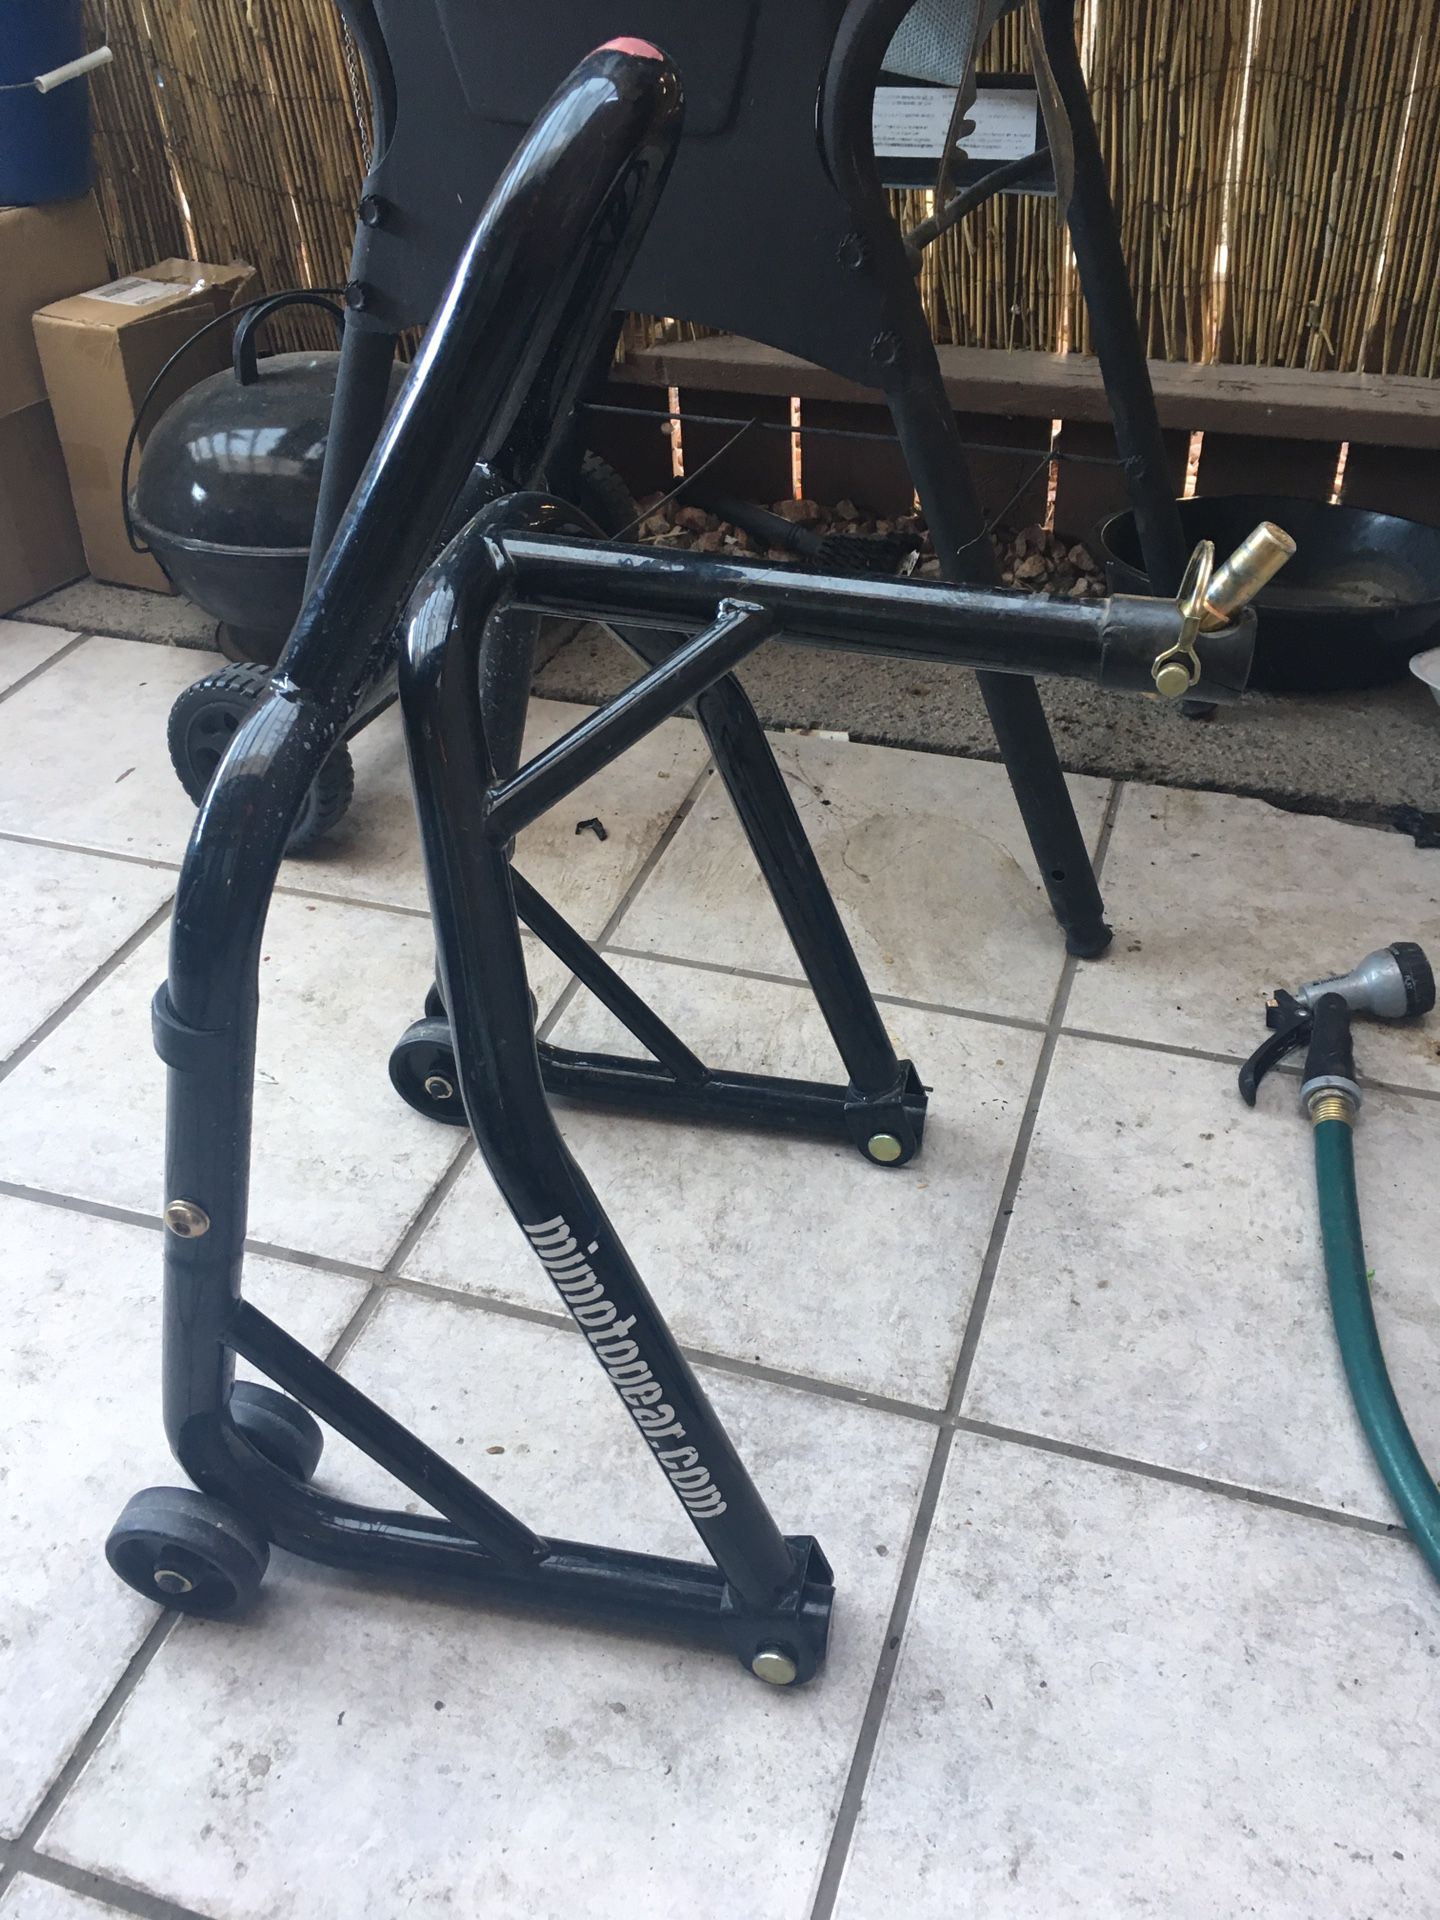 Yamaha r6 motorcycle stands